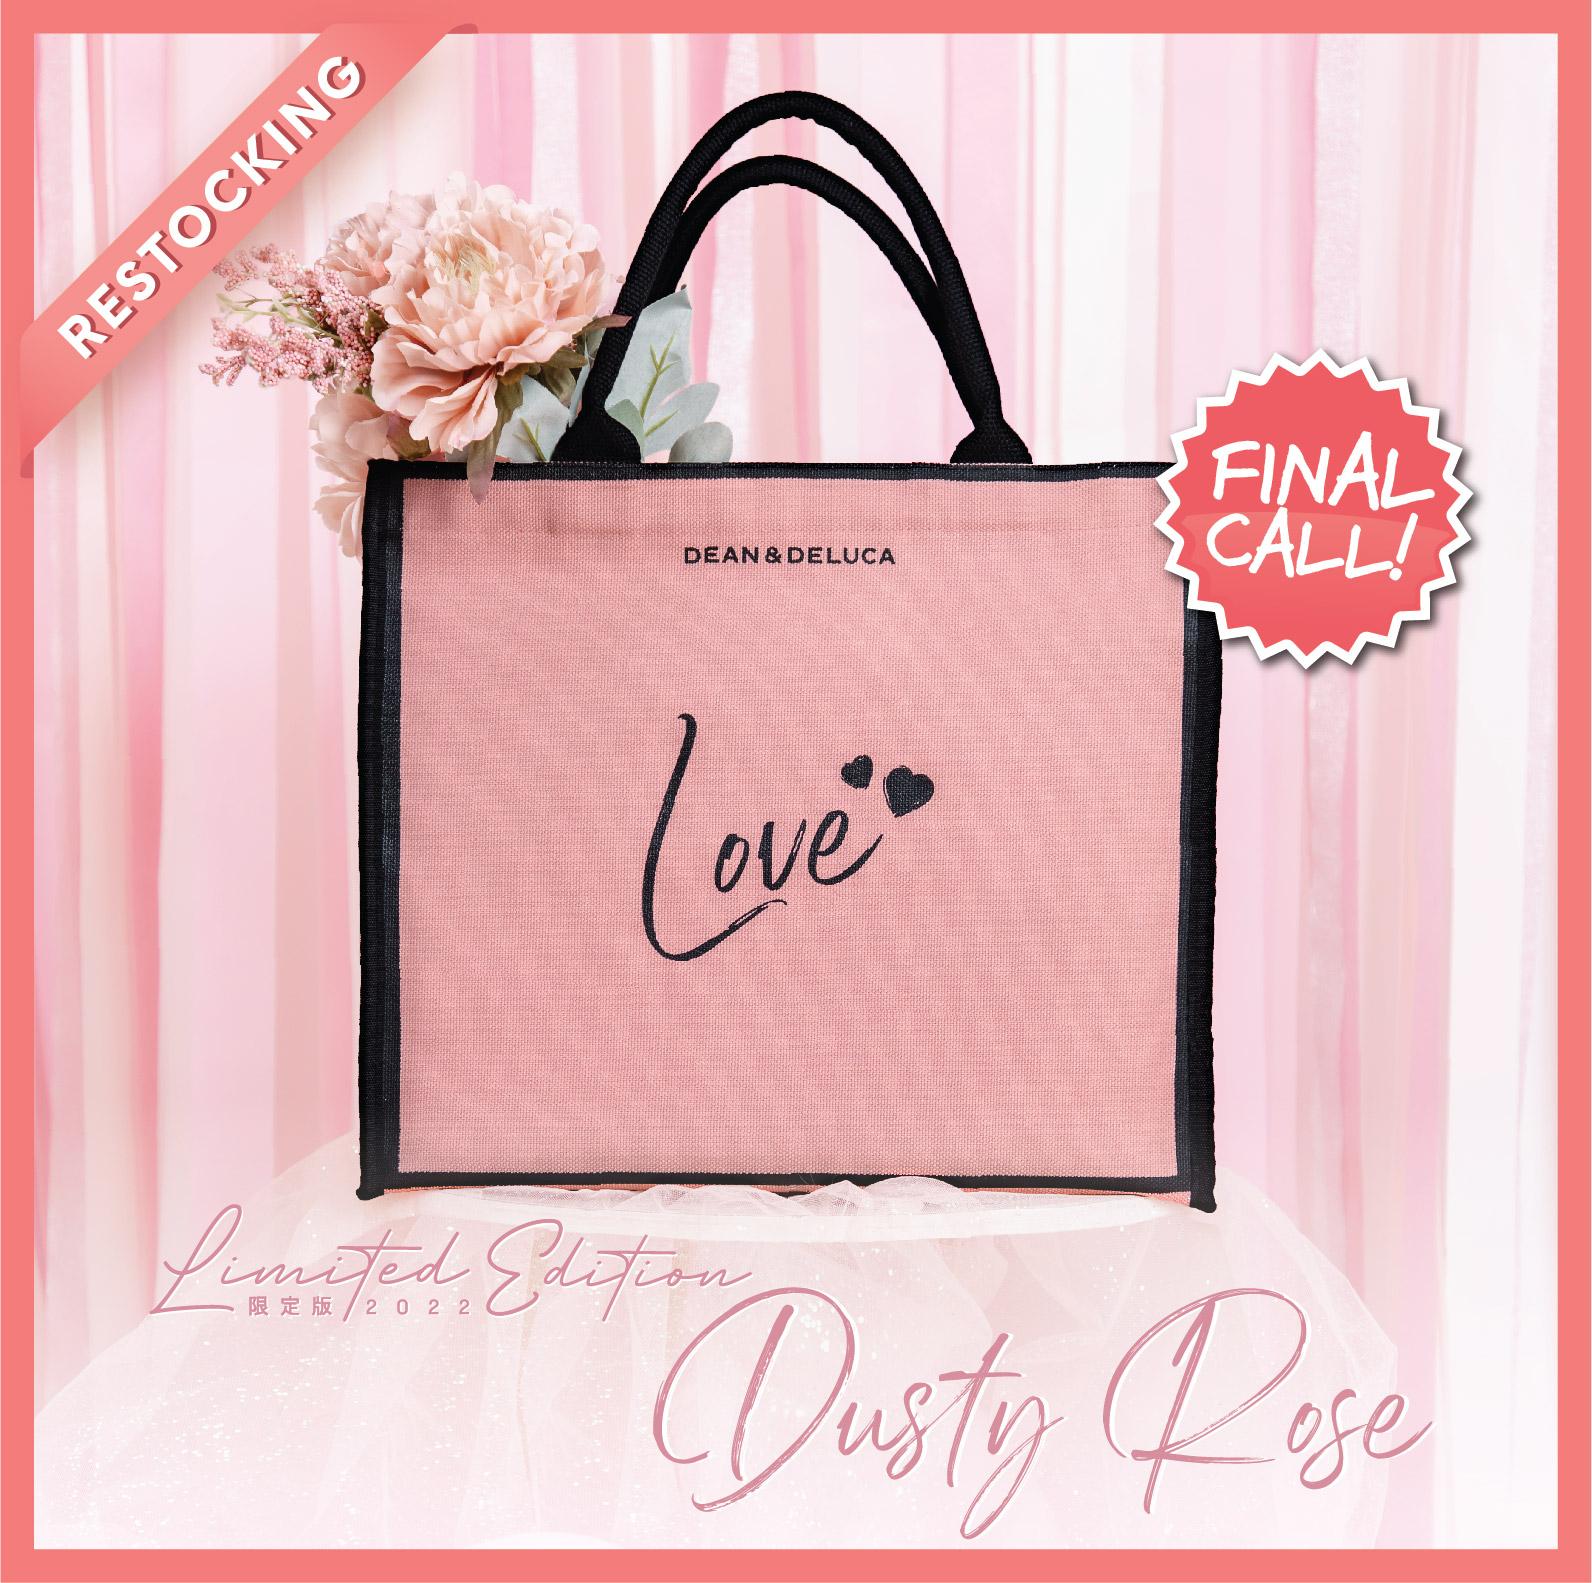 DEAN&DELUCA TOTE BAG SQUARE - DUSTY ROSE ( ** Limited Edition)